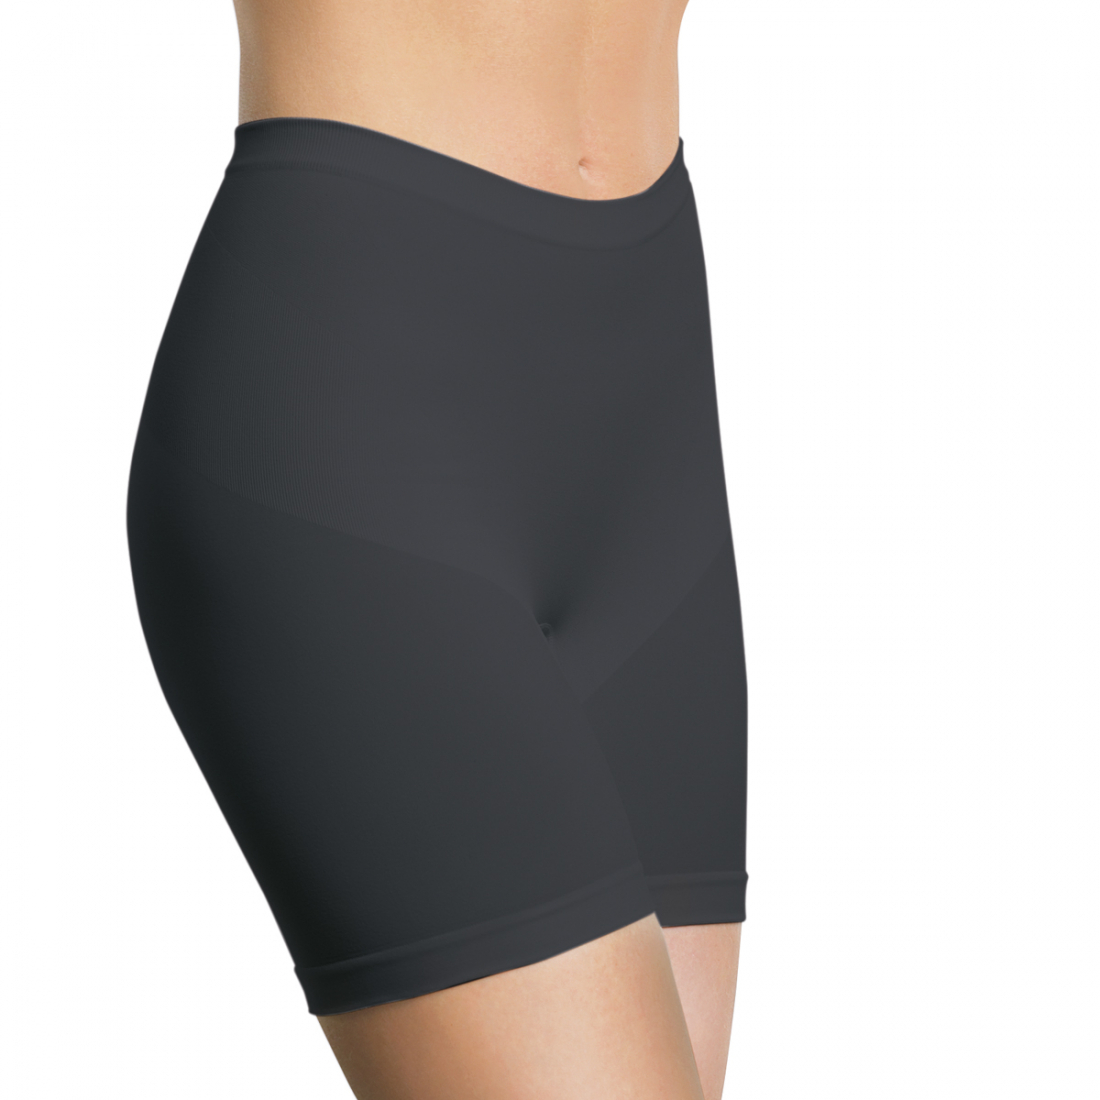 Women's 'Silhouette Extra' Shaping Short